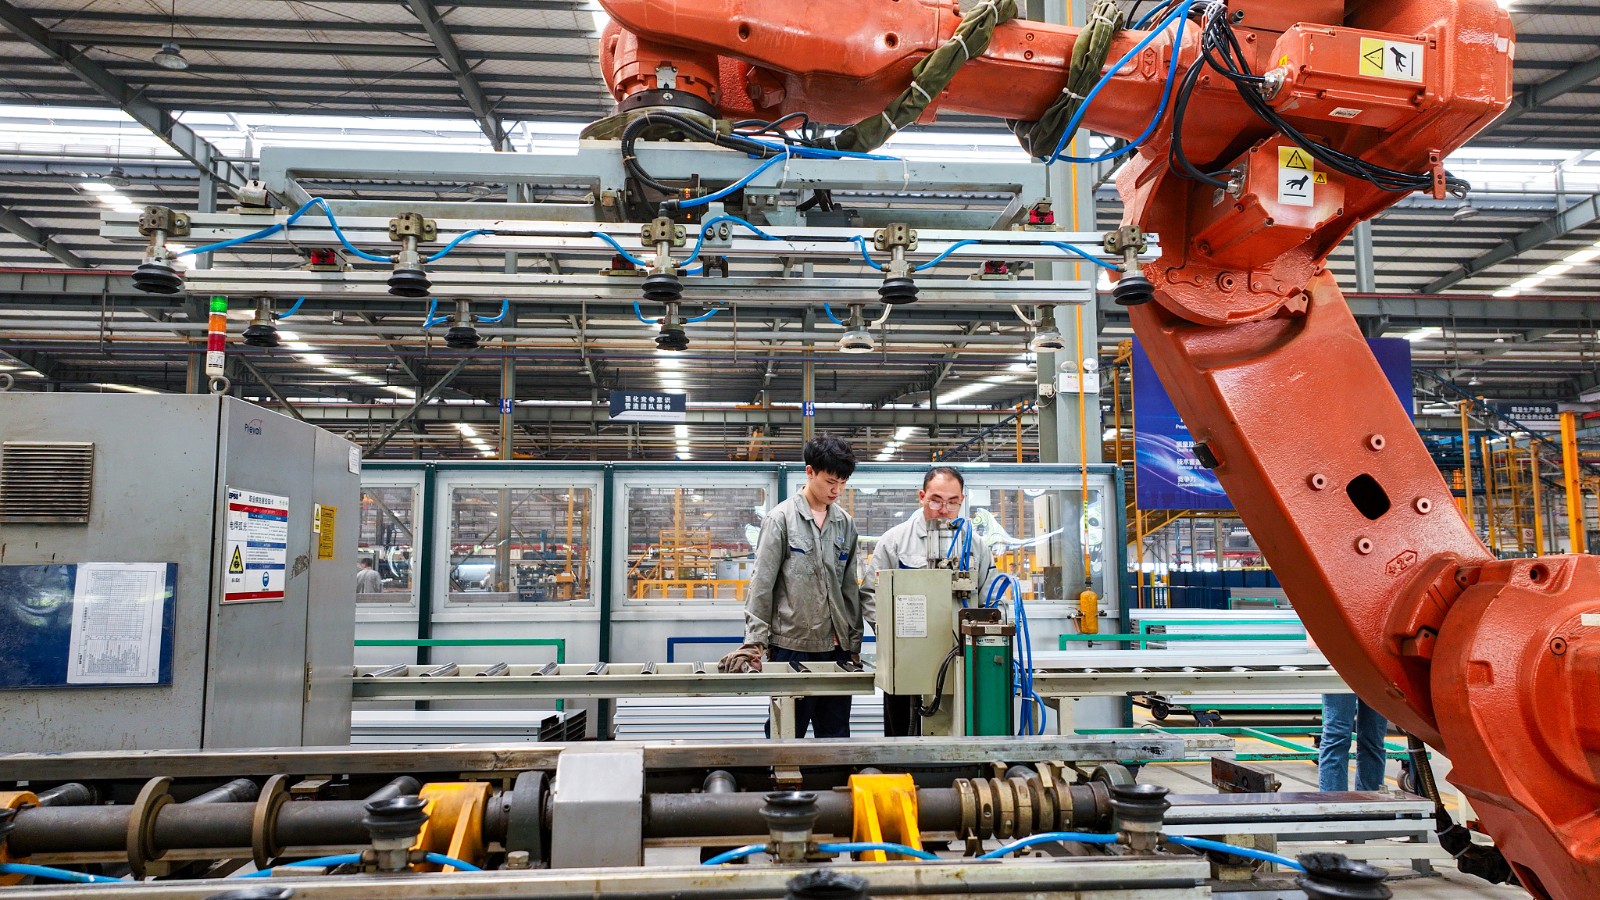 Workers at a company in Huzhou City, Zhejiang Province, operating an intelligent robotic arm production line for overseas shipment orders on May 29. / CFP